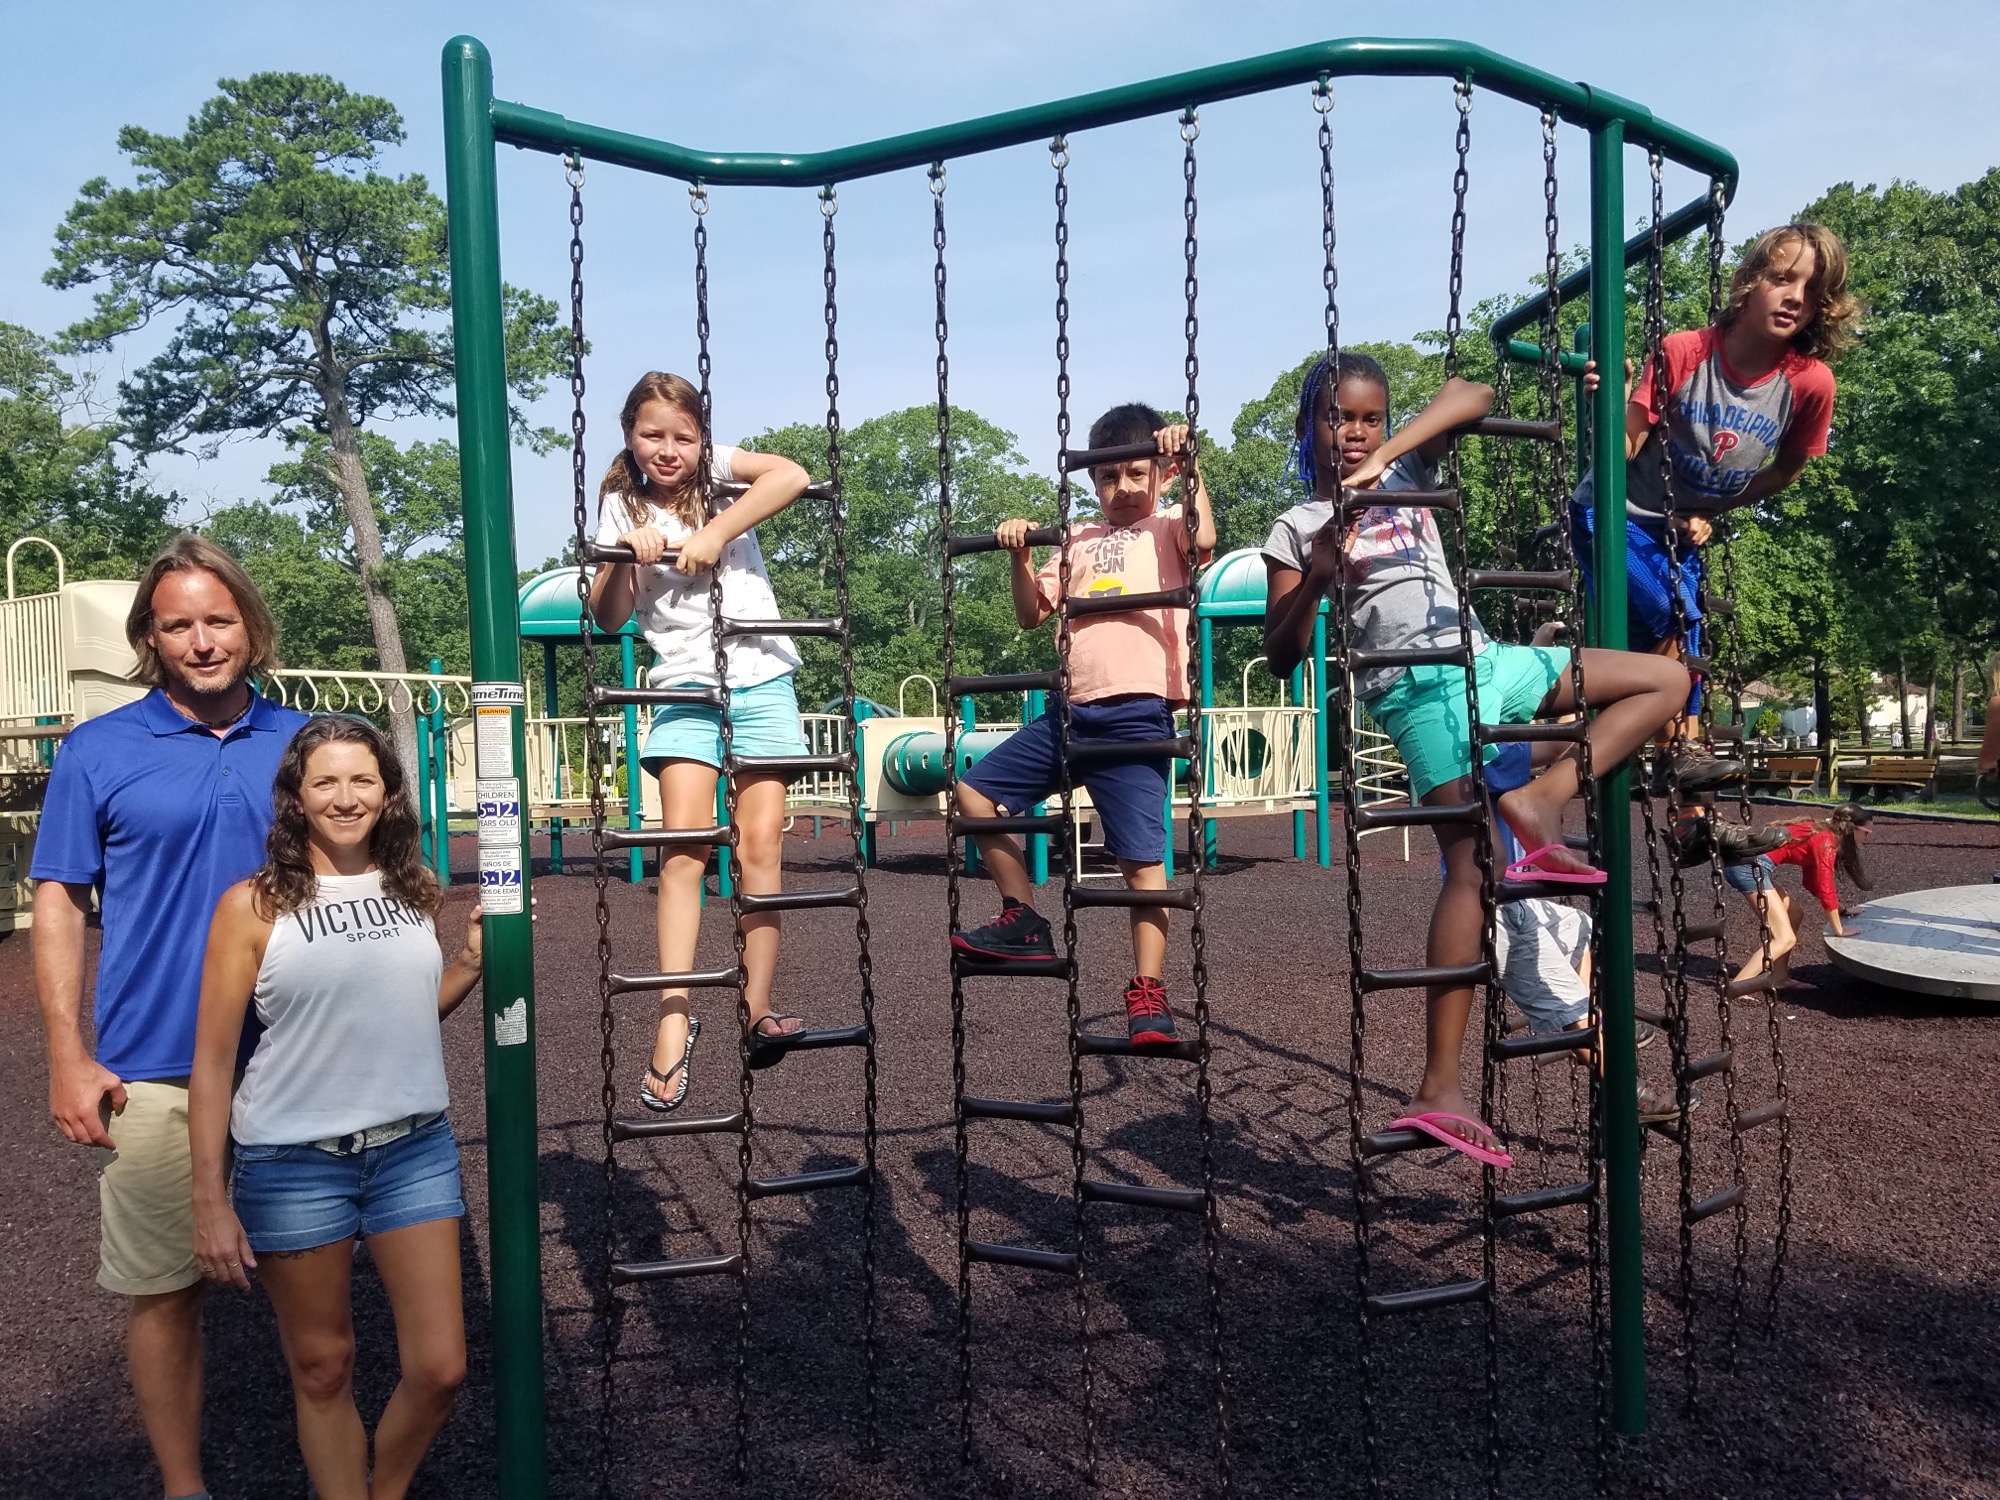 Aaron and Krista Clauser took their children and two Fresh Air Fund children to the park recently